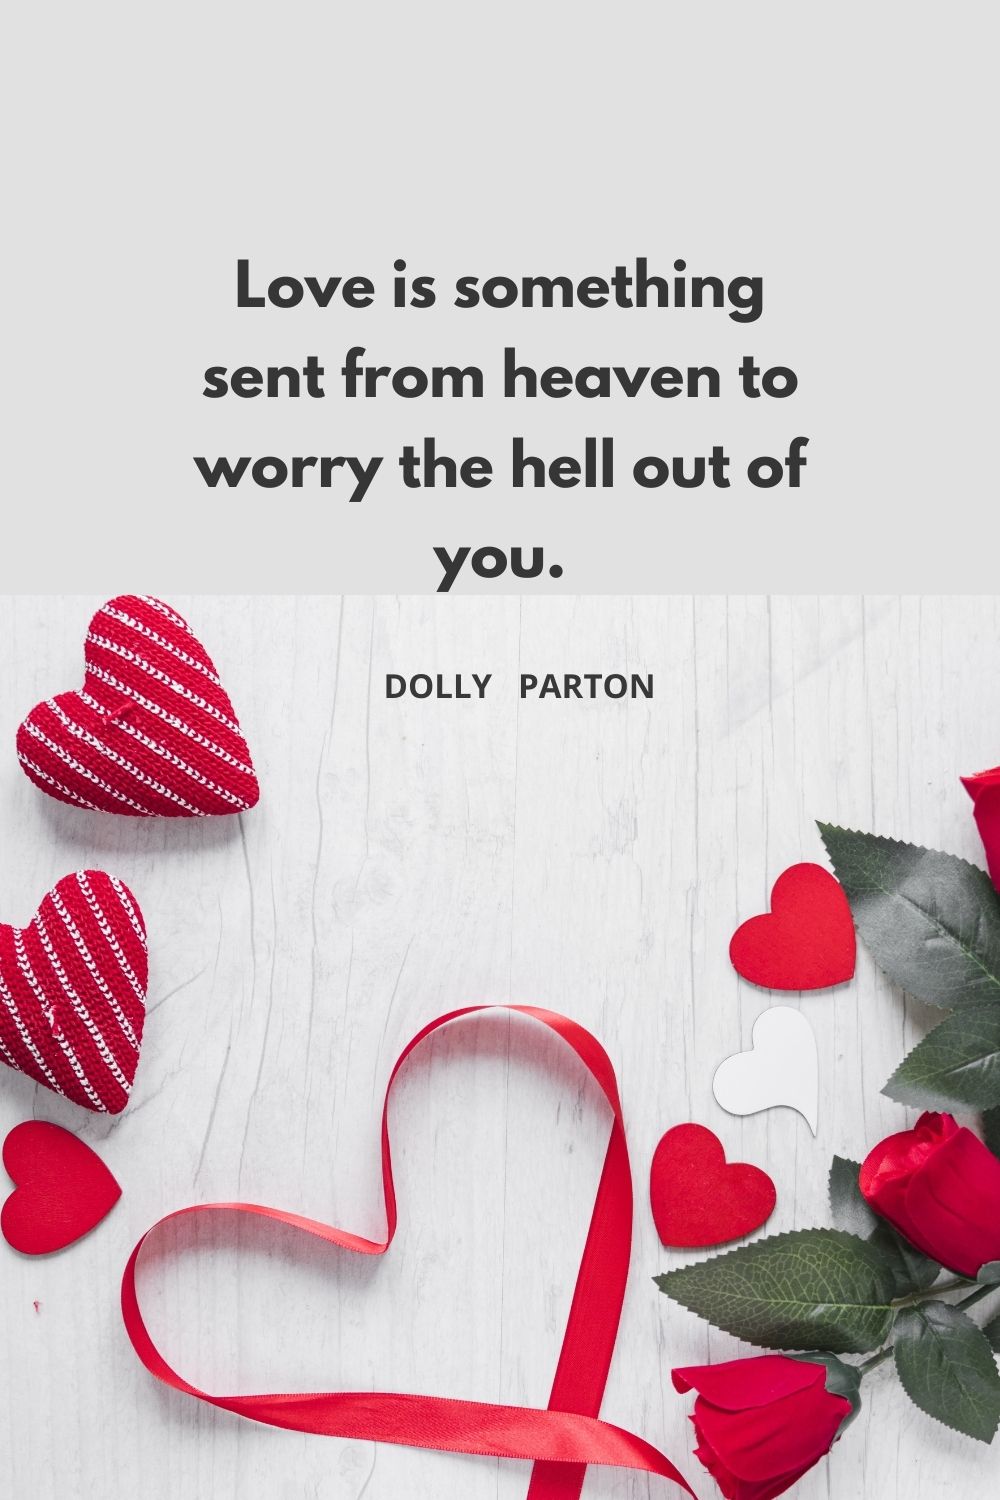 Love is something sent from heaven to worry the hell out of you.